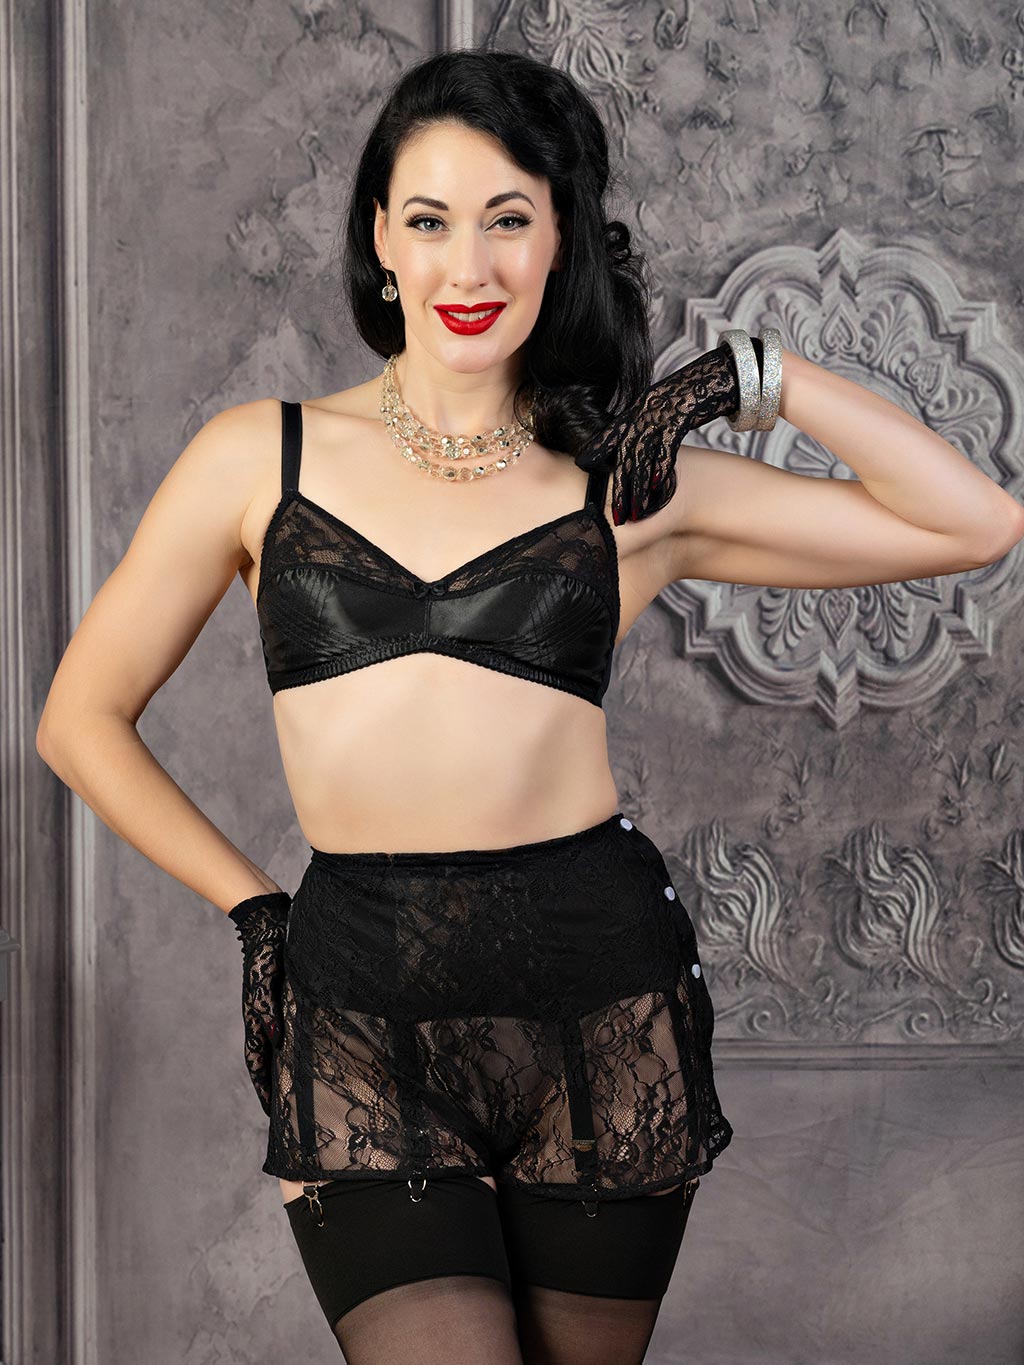 1940s inspired black lace french knickers and soft cup bra worn with black seamed stockings and vintage black lace wrist gloves